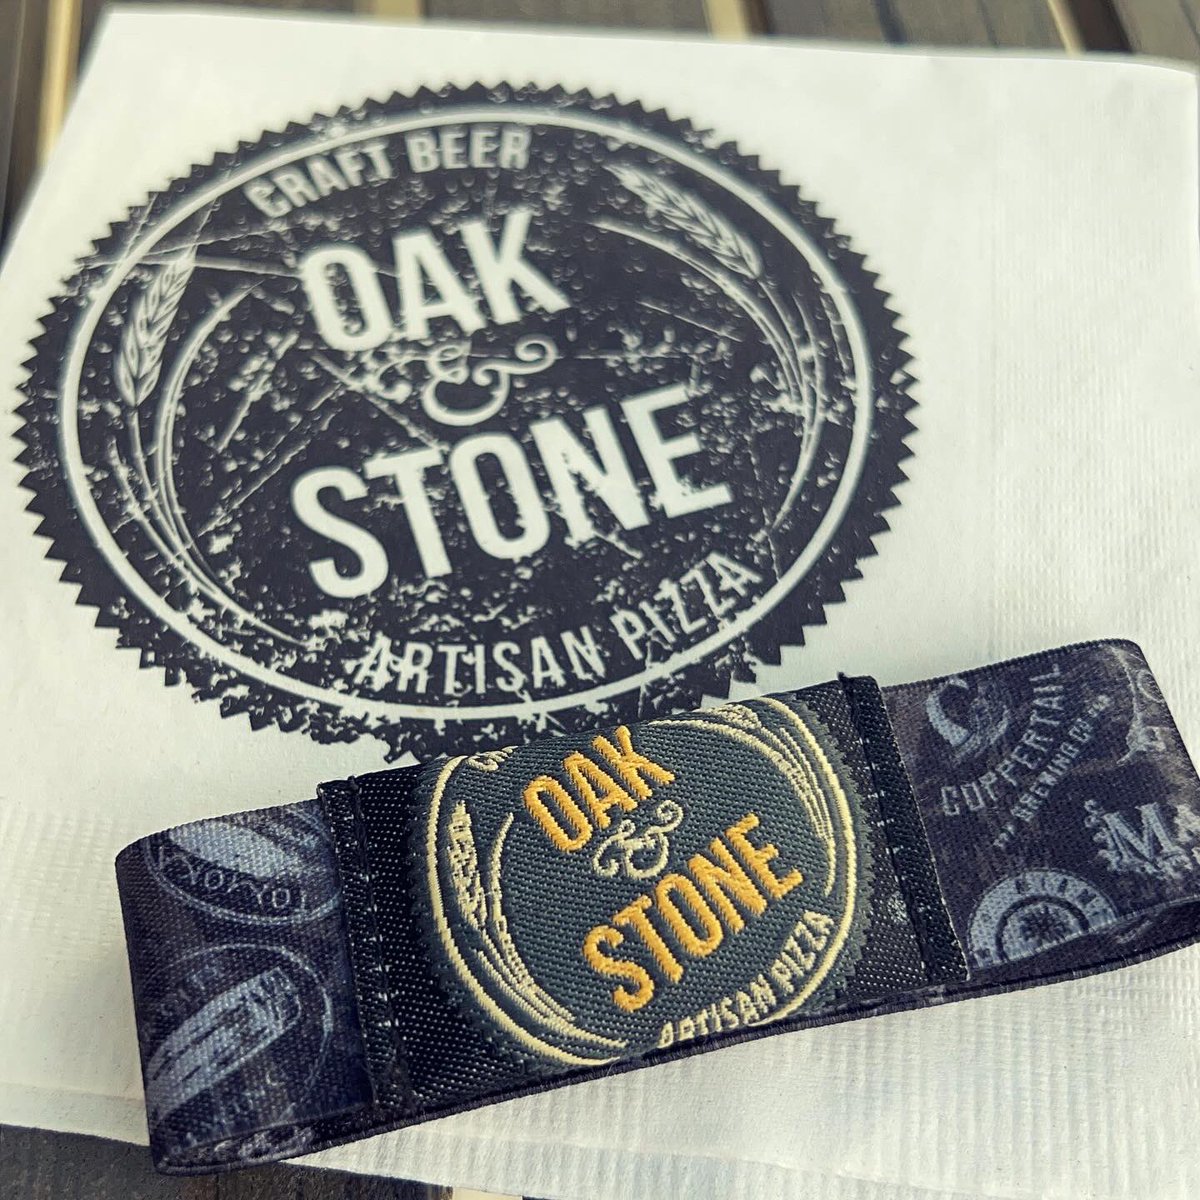 We decided to stop by Oak & Stone for drinks and dessert. #tampa #tampaflorida #tampafoodie #thingstodointampa #thatssotampa #florida #tampalife #beachlife #tampaeats #tampariverwalk #stpete #stpetebeach #riverwalk #floridatravel #saltlife #tampafood #ディズニーワールド